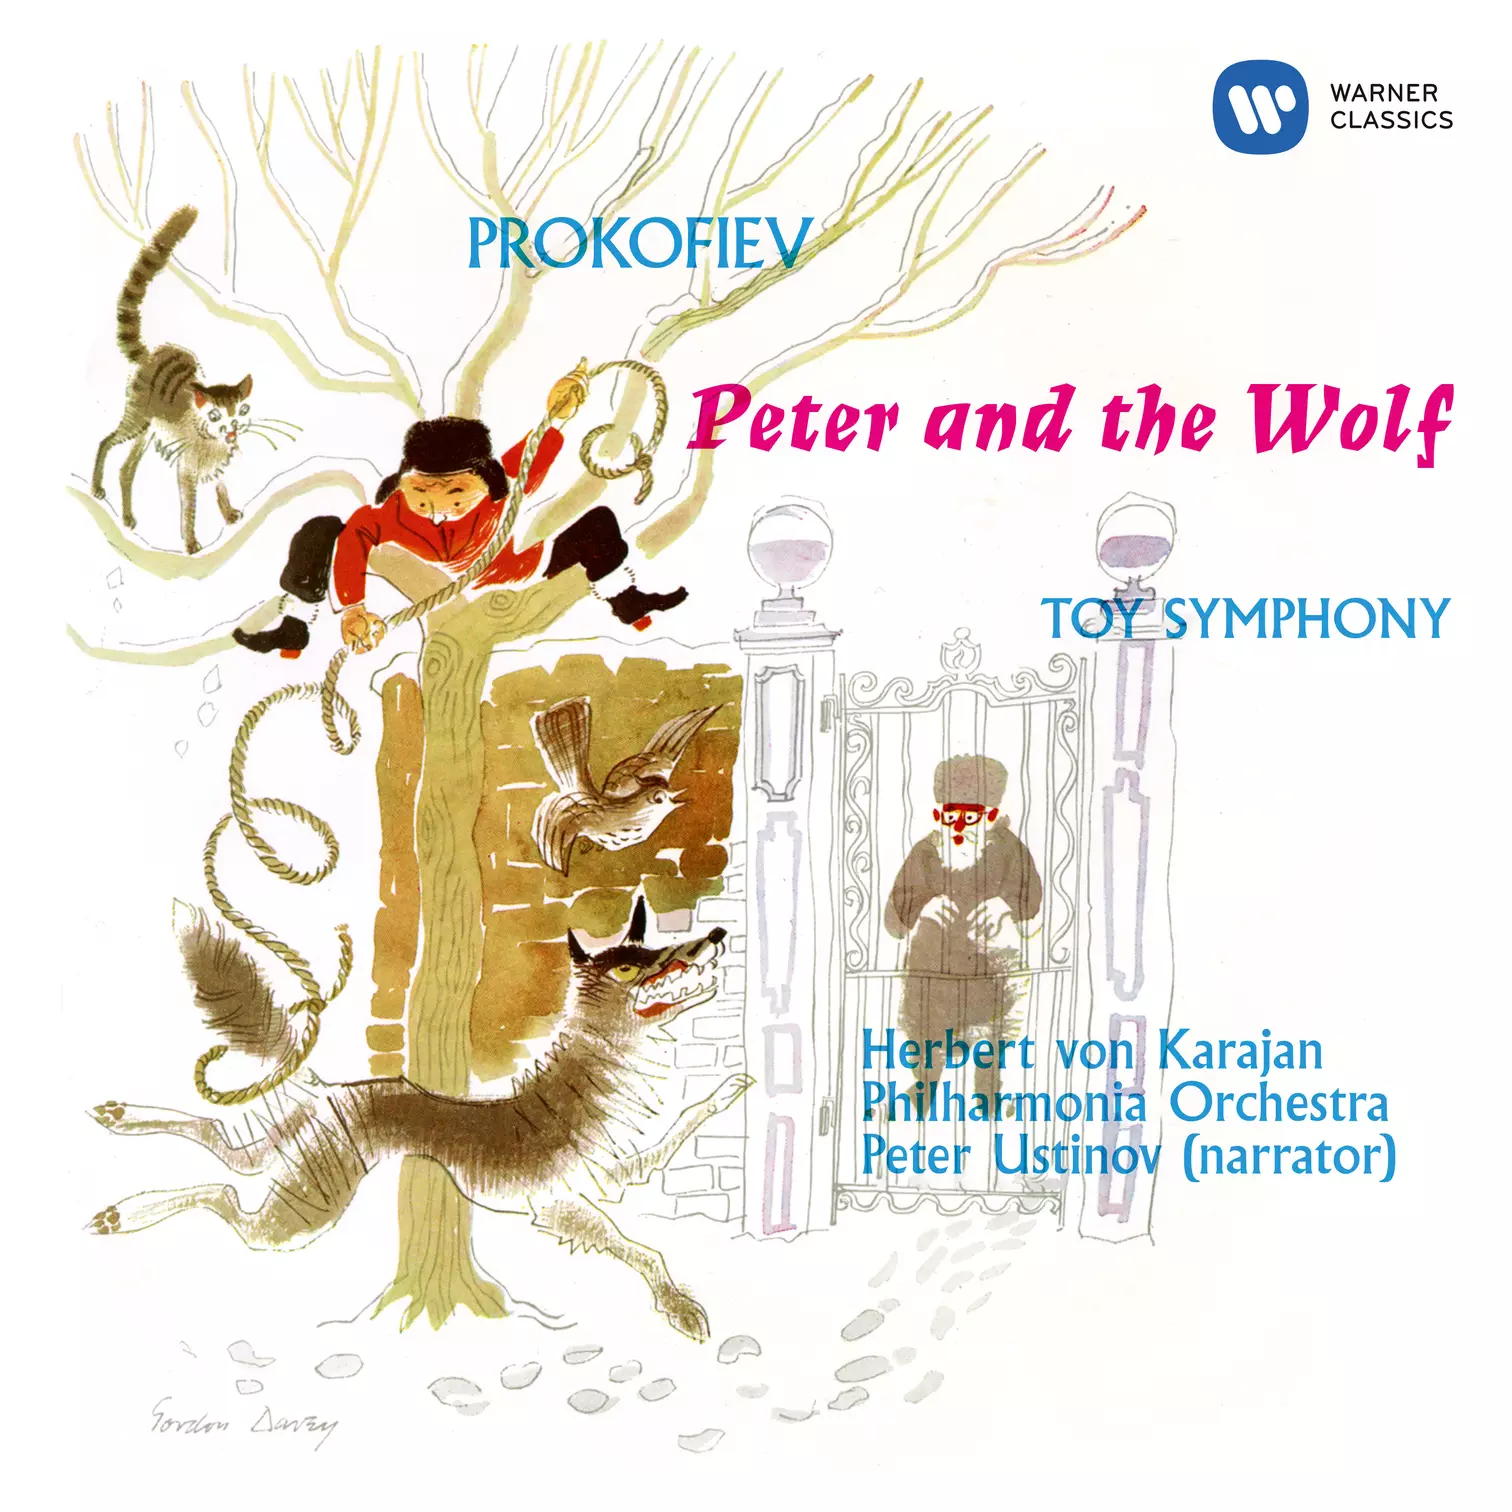 Prokofiev: Peter and the Wolf, Op. 67 – Angerer: Toy Symphony (Attrib. L. Mozart)